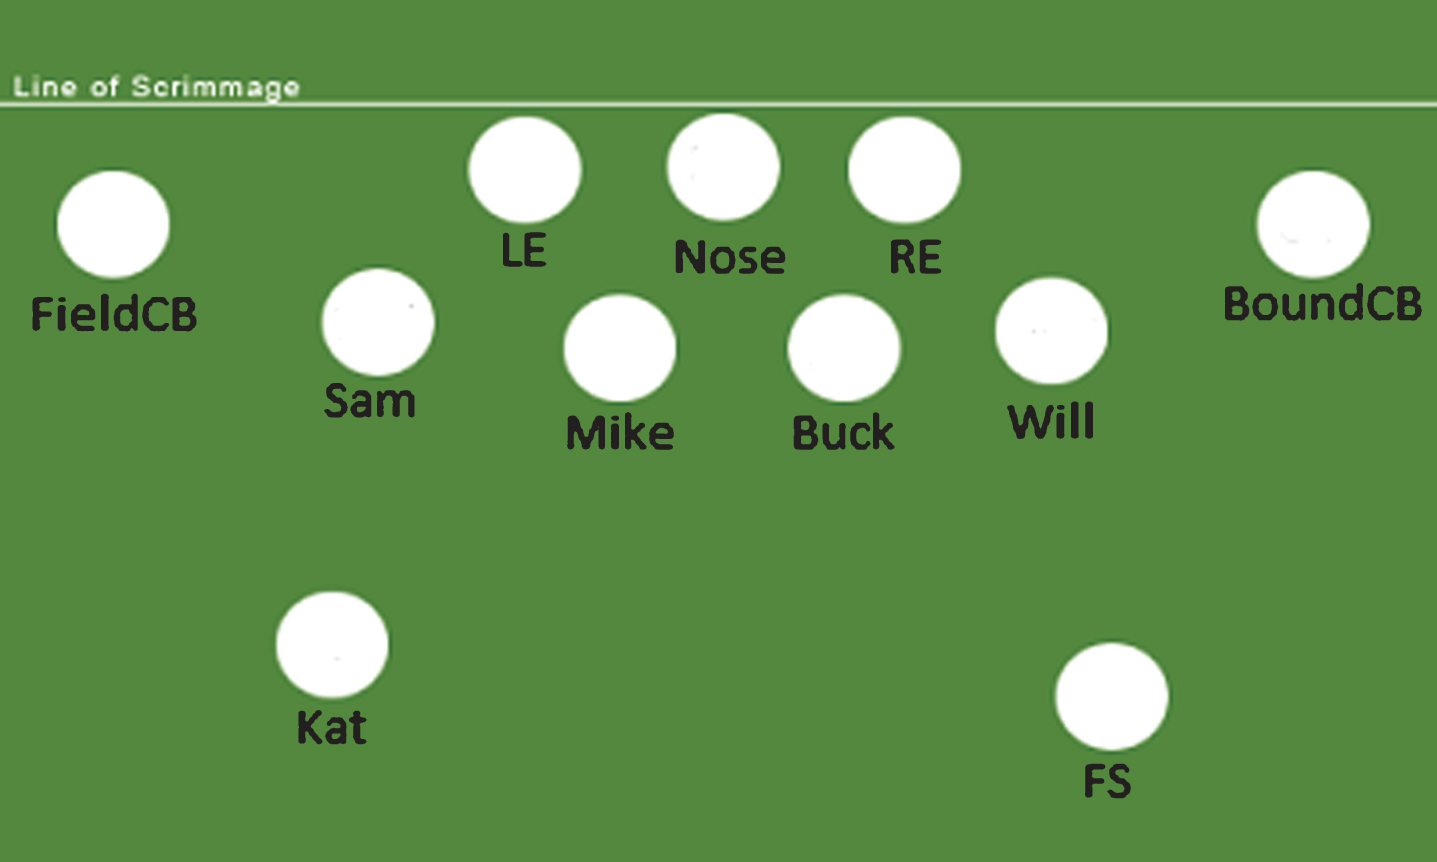 A typical 3–4 defensive formation with position labels. The strong and field side of the field is the left side in this picture, and the weak and boundary side of the field are on the right side.